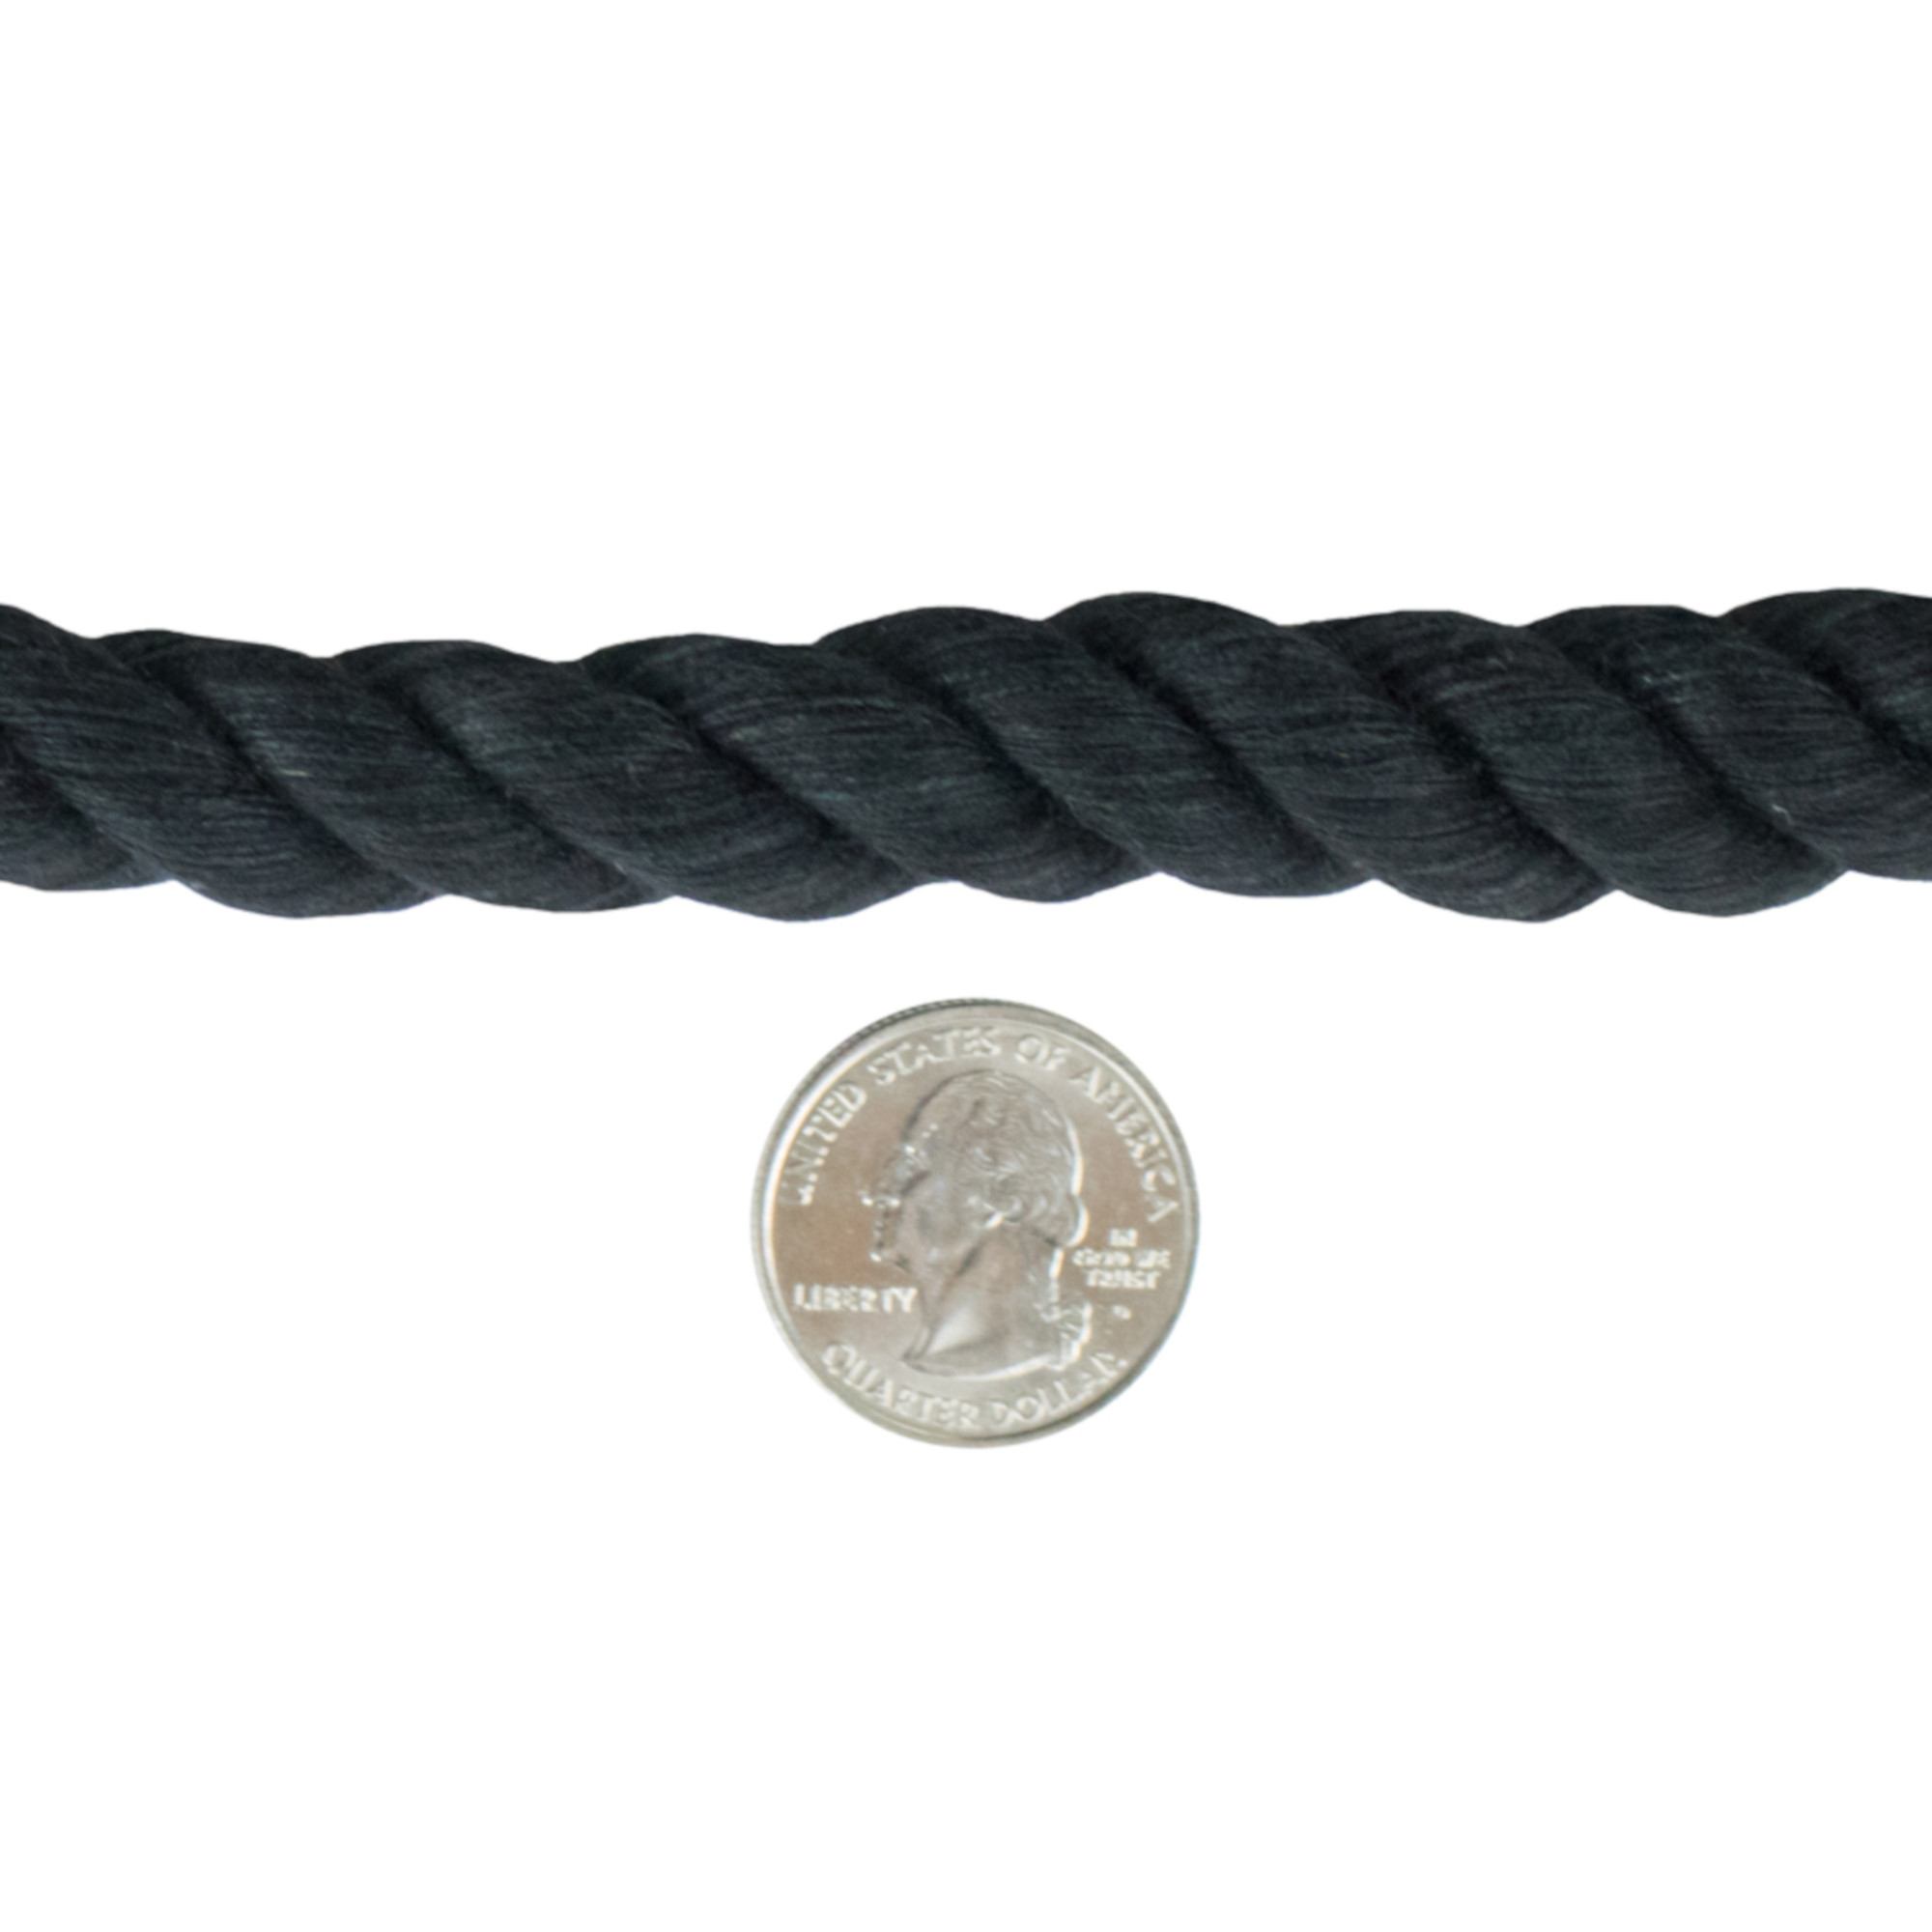 West Coast Paracord Natural Cotton Rope 1/2 Inch Twisted Soft Rope by the Foot in 25 Feet, 50 Feet, 100 Feet, and 600 Feet. Pet Safe and USA Made - image 3 of 4